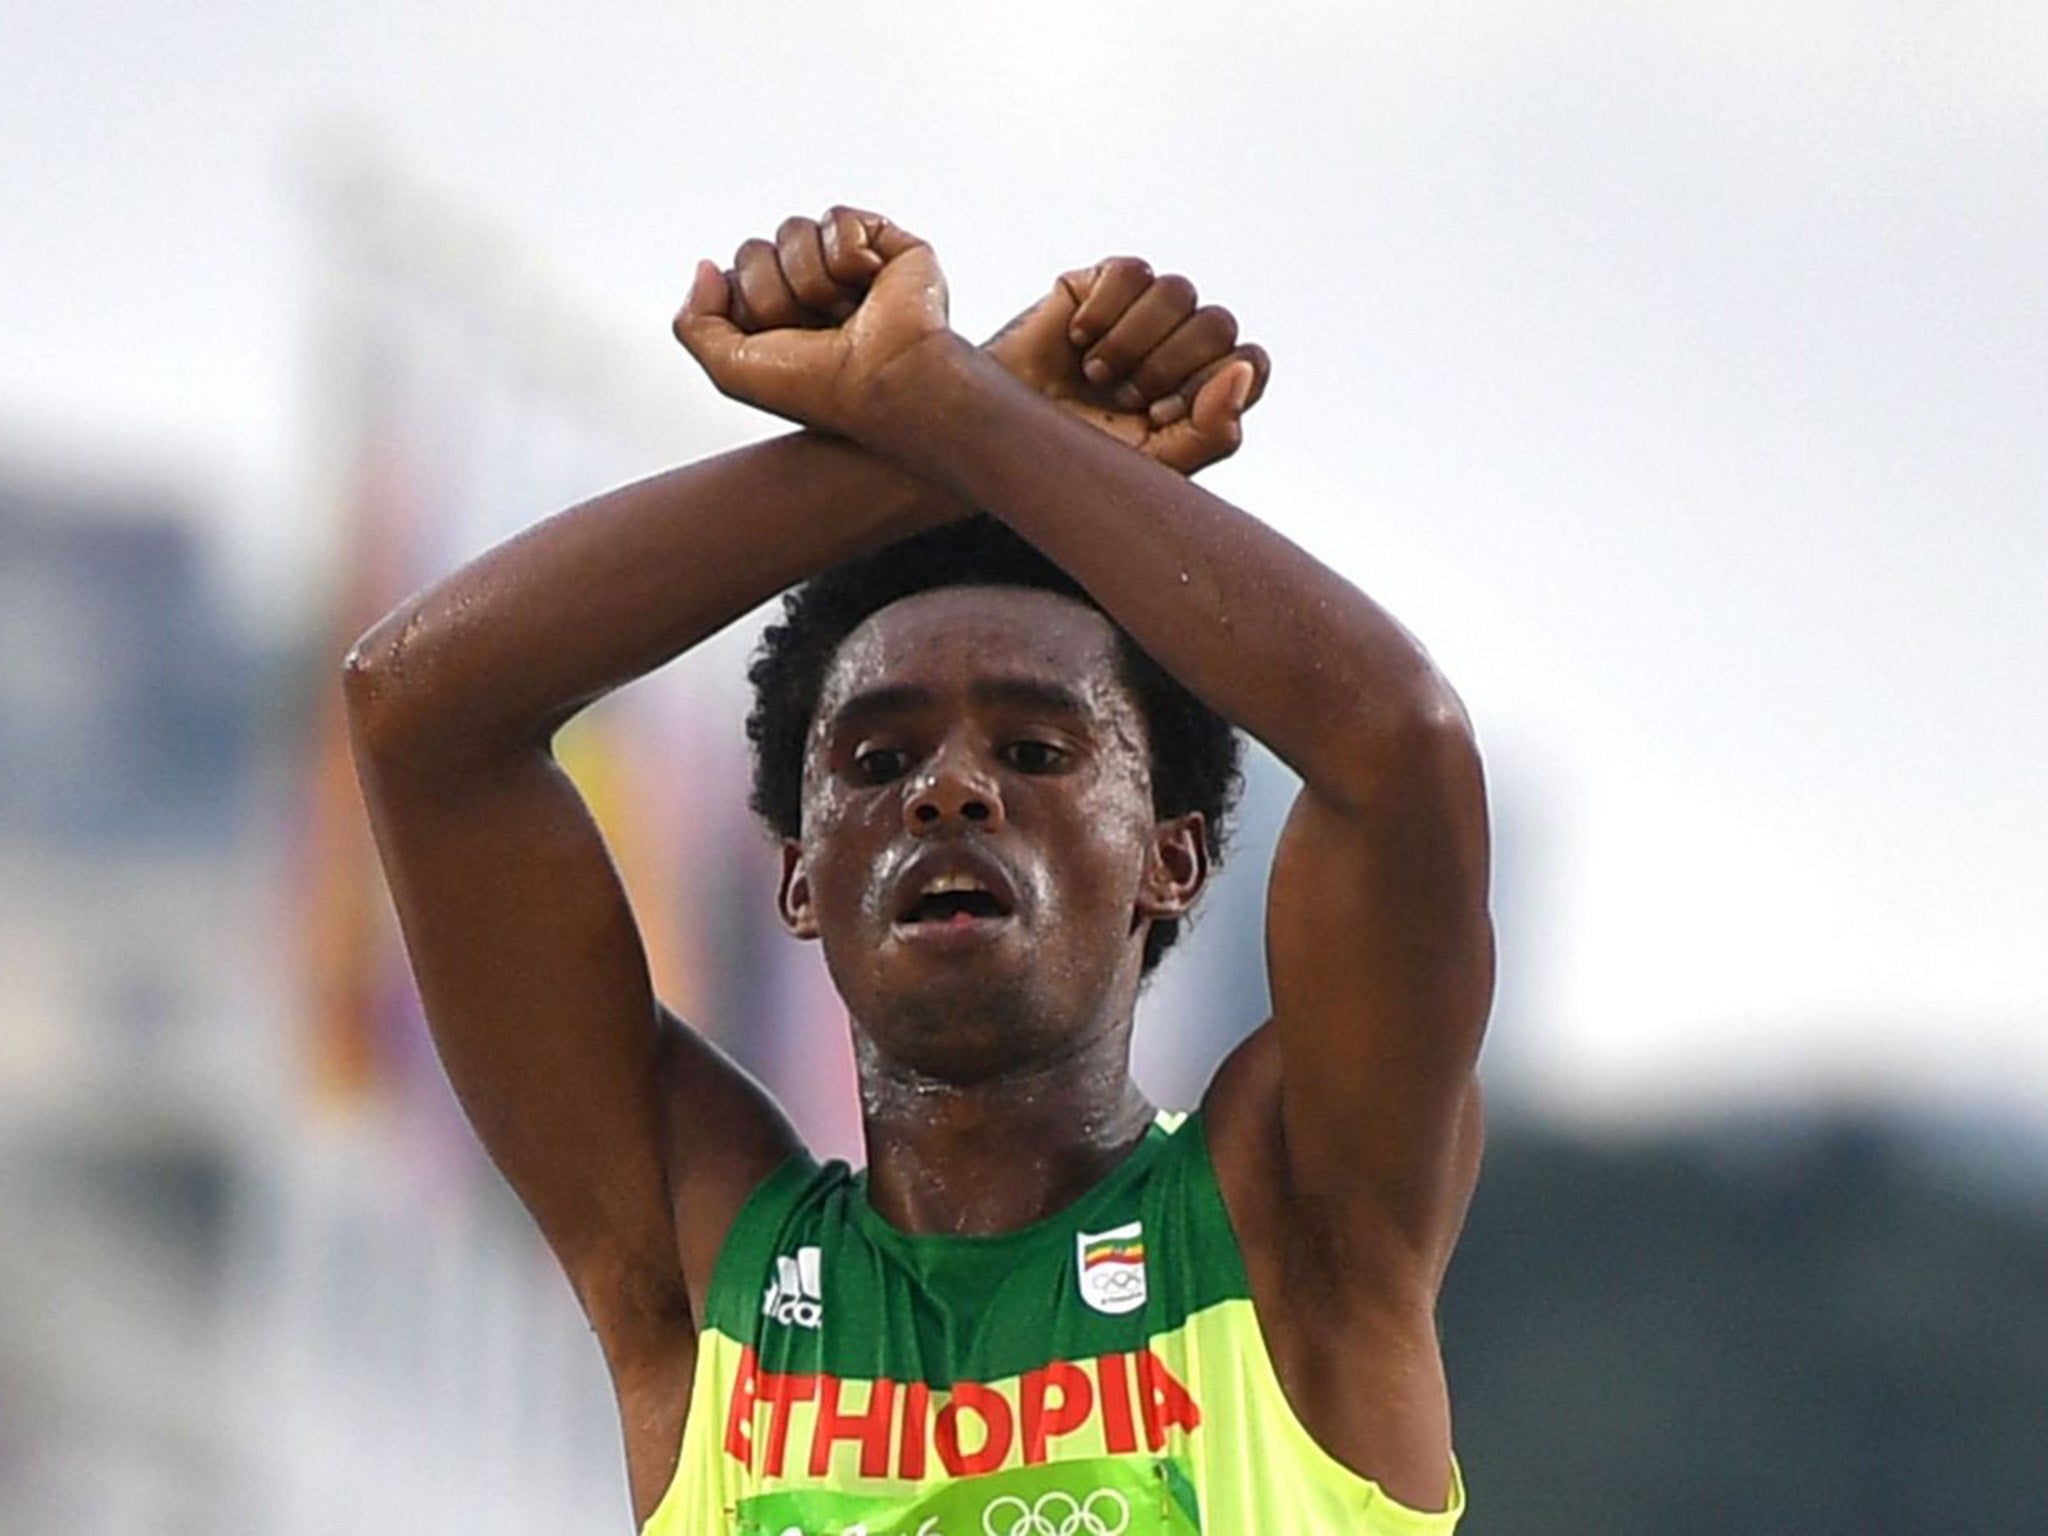 Ethiopian marathon runner could go to jail for anti-government protest on the finishing line